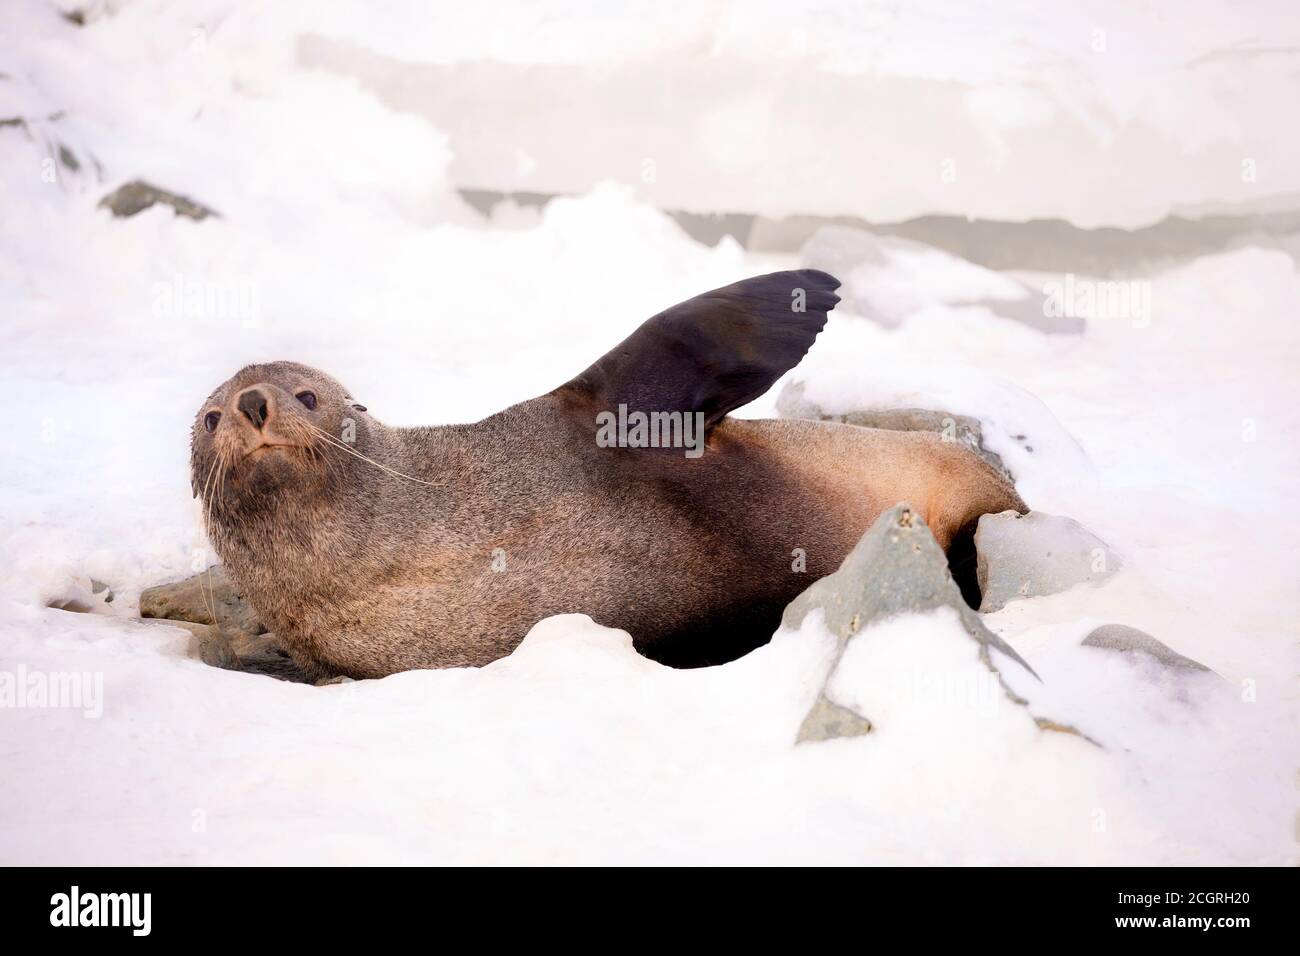 The Antarctic fur seal, sometimes called the Kerguelen fur seal, also known as Arctocephalus gazella sitting calm on the snow in the Antarctica. Stock Photo